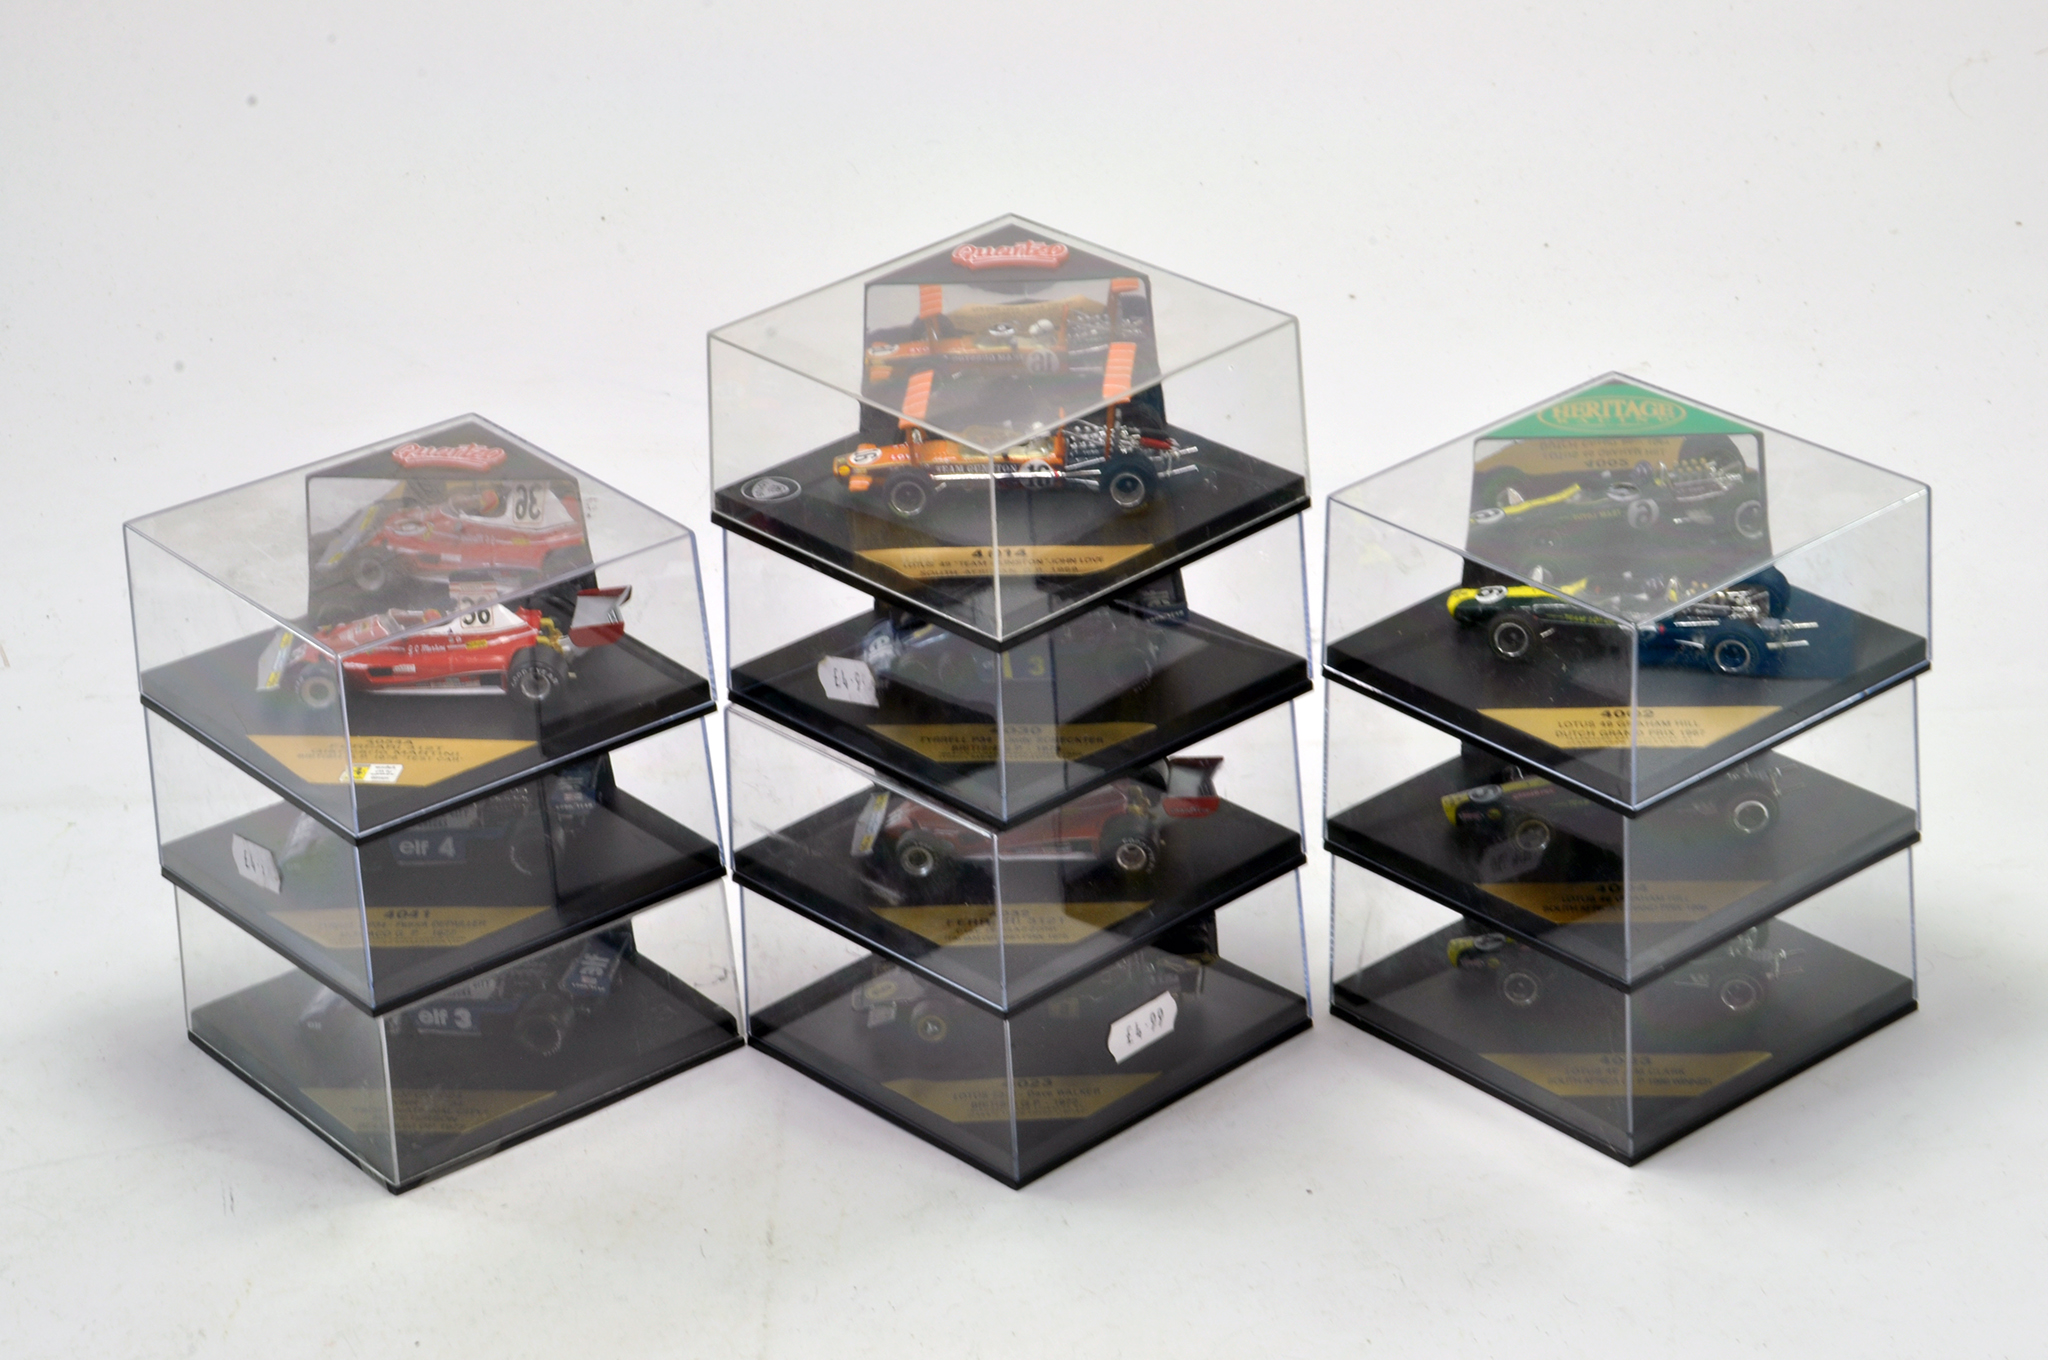 Onyx / Quartzo Classic Formula One diecast group comprising various Cars / Drivers. Generally